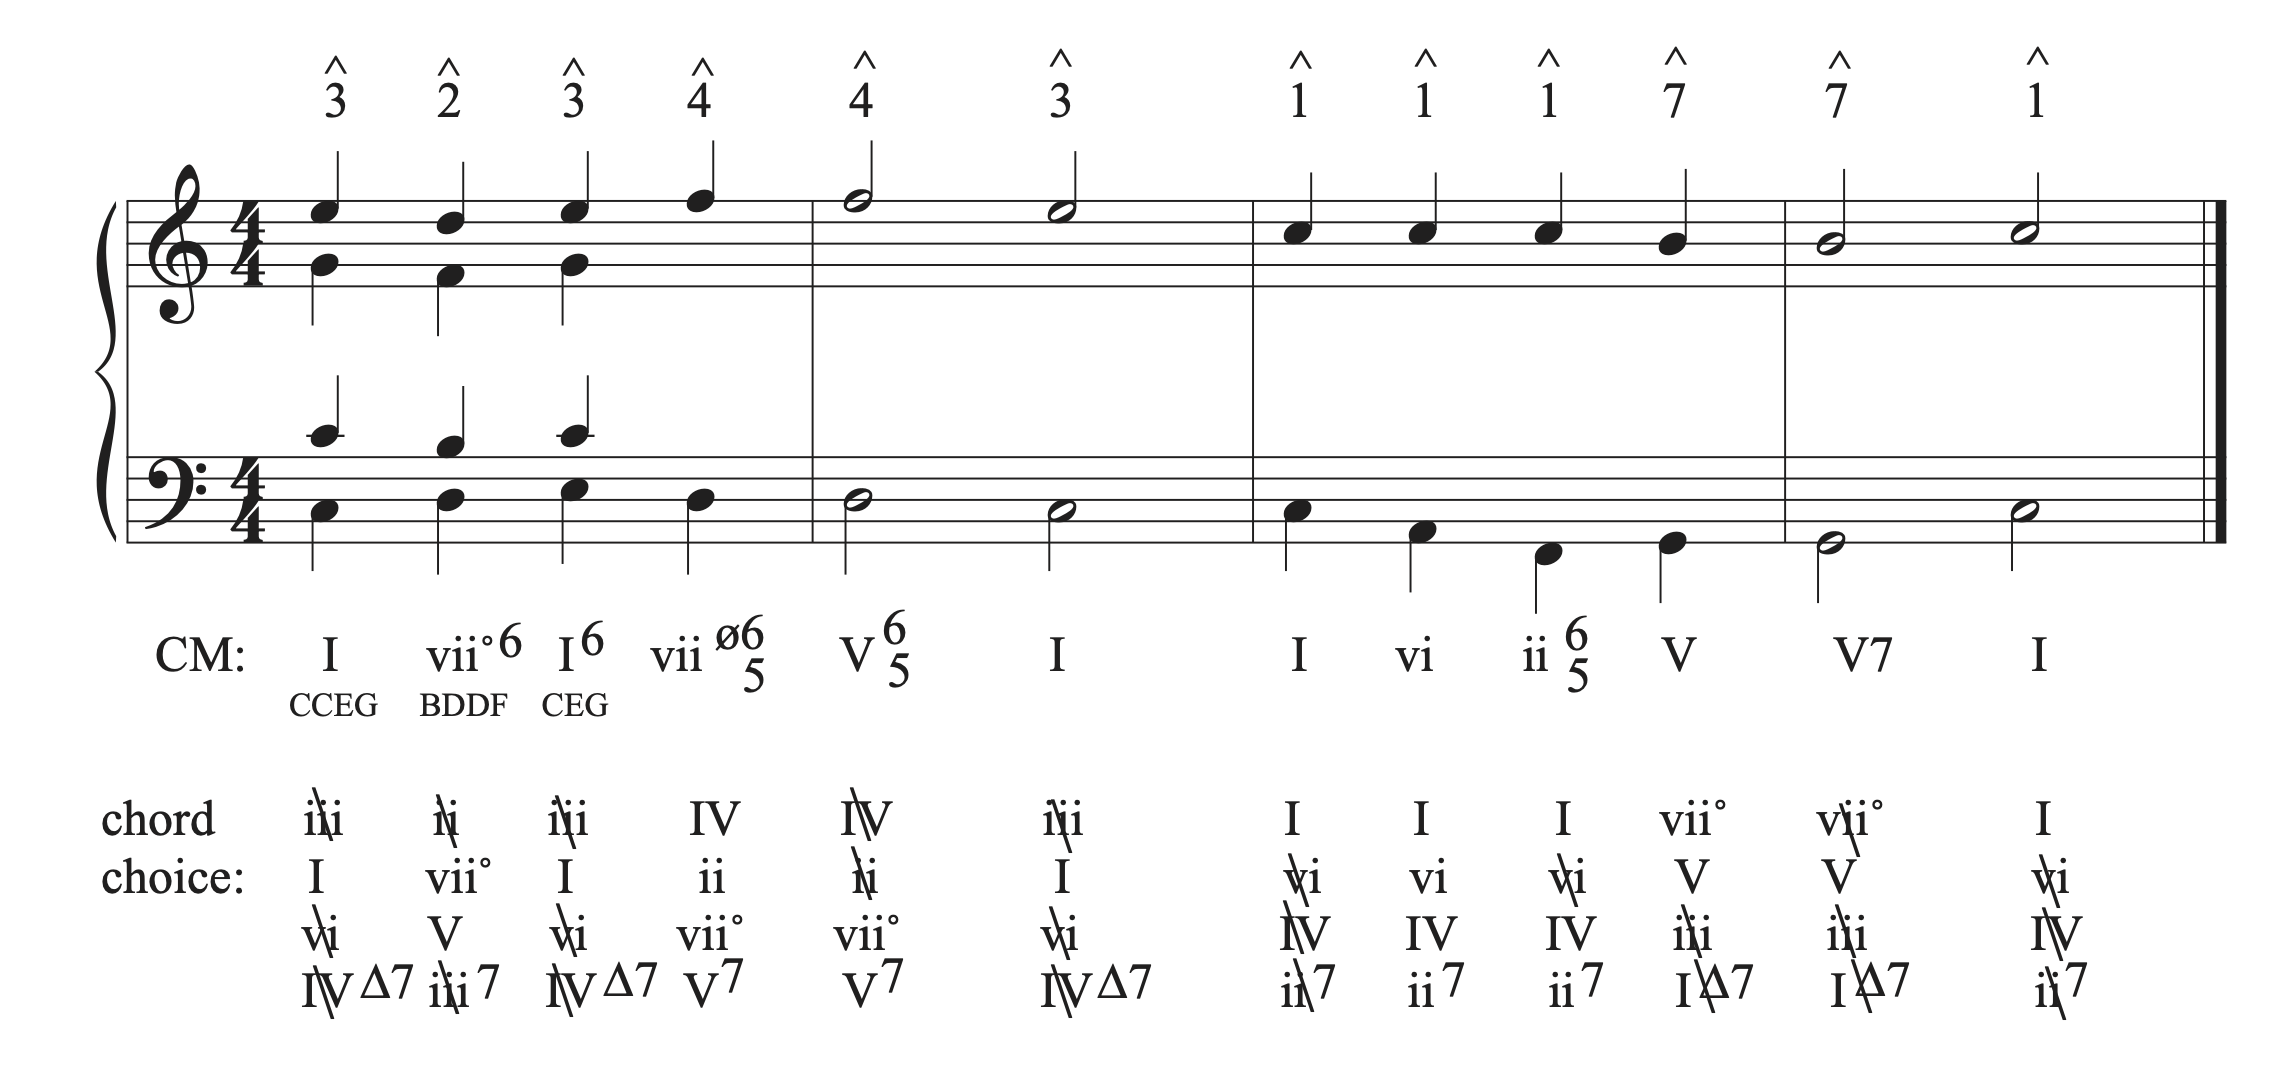 The musical example in C with the alto and tenor added to the first 3 chords.